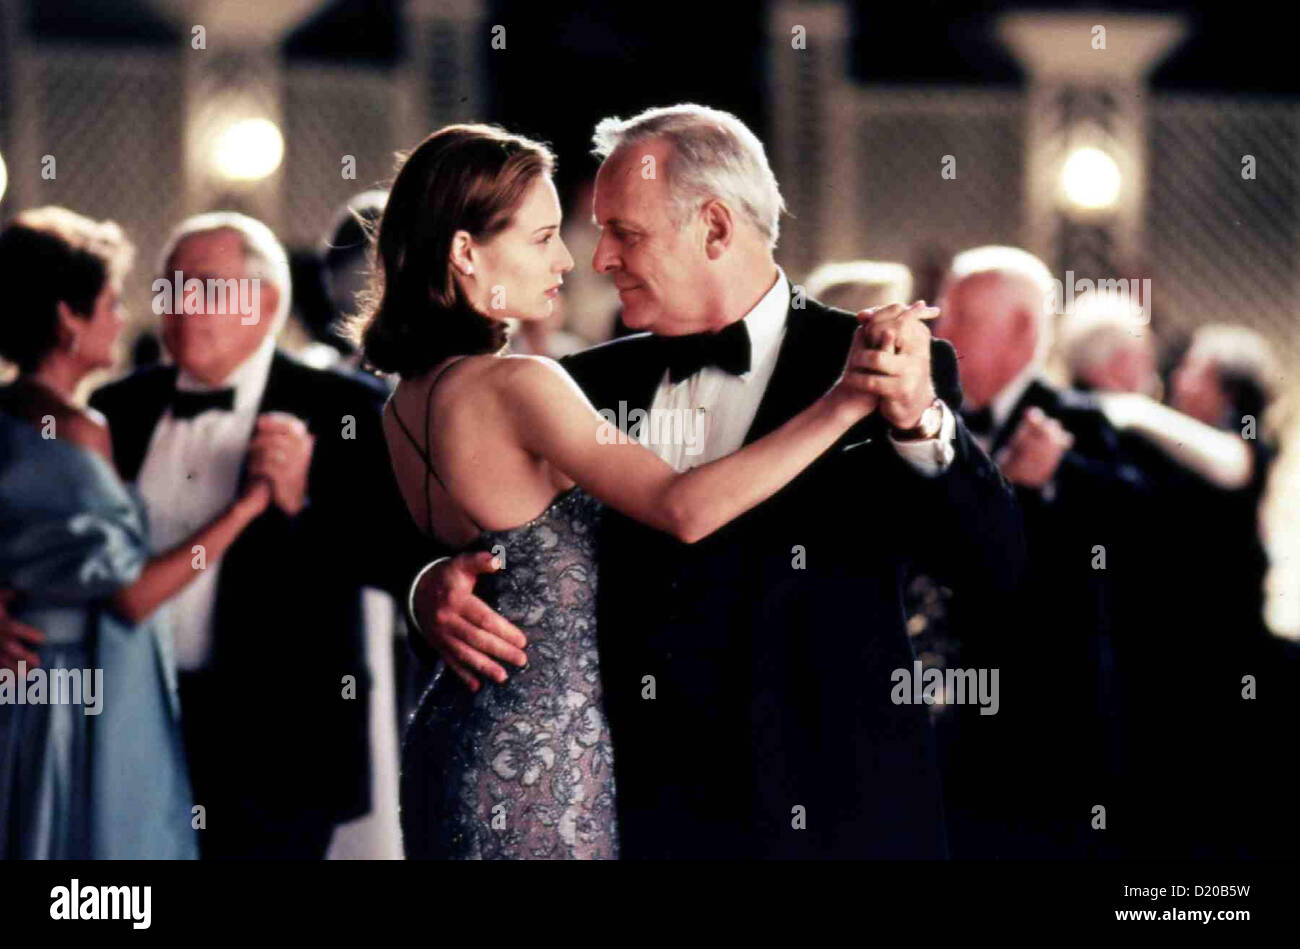 SS3560609) Movie picture of Claire Forlani buy celebrity photos